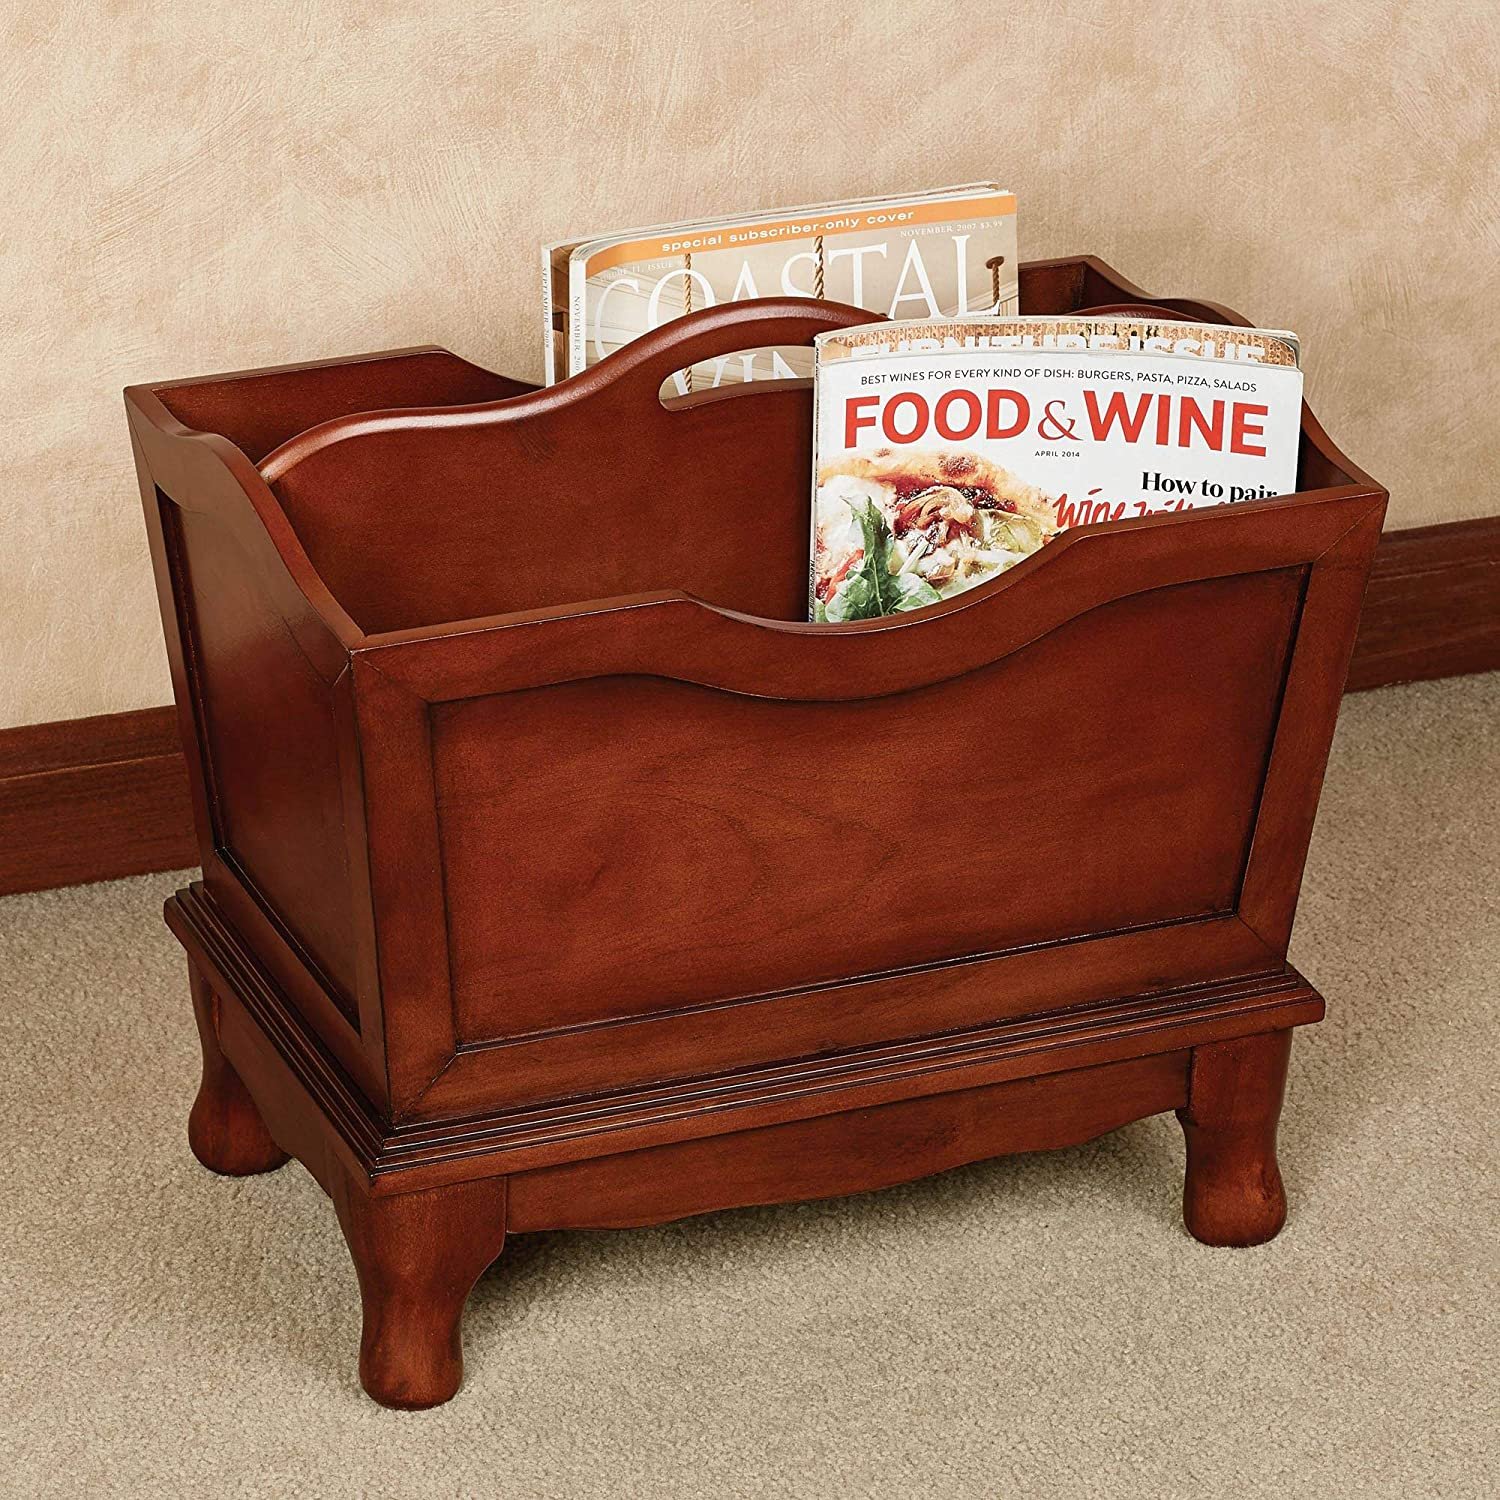 Touch of Class Magnificent Lyndhurst Wooden Magazine Rack Classic Cherry